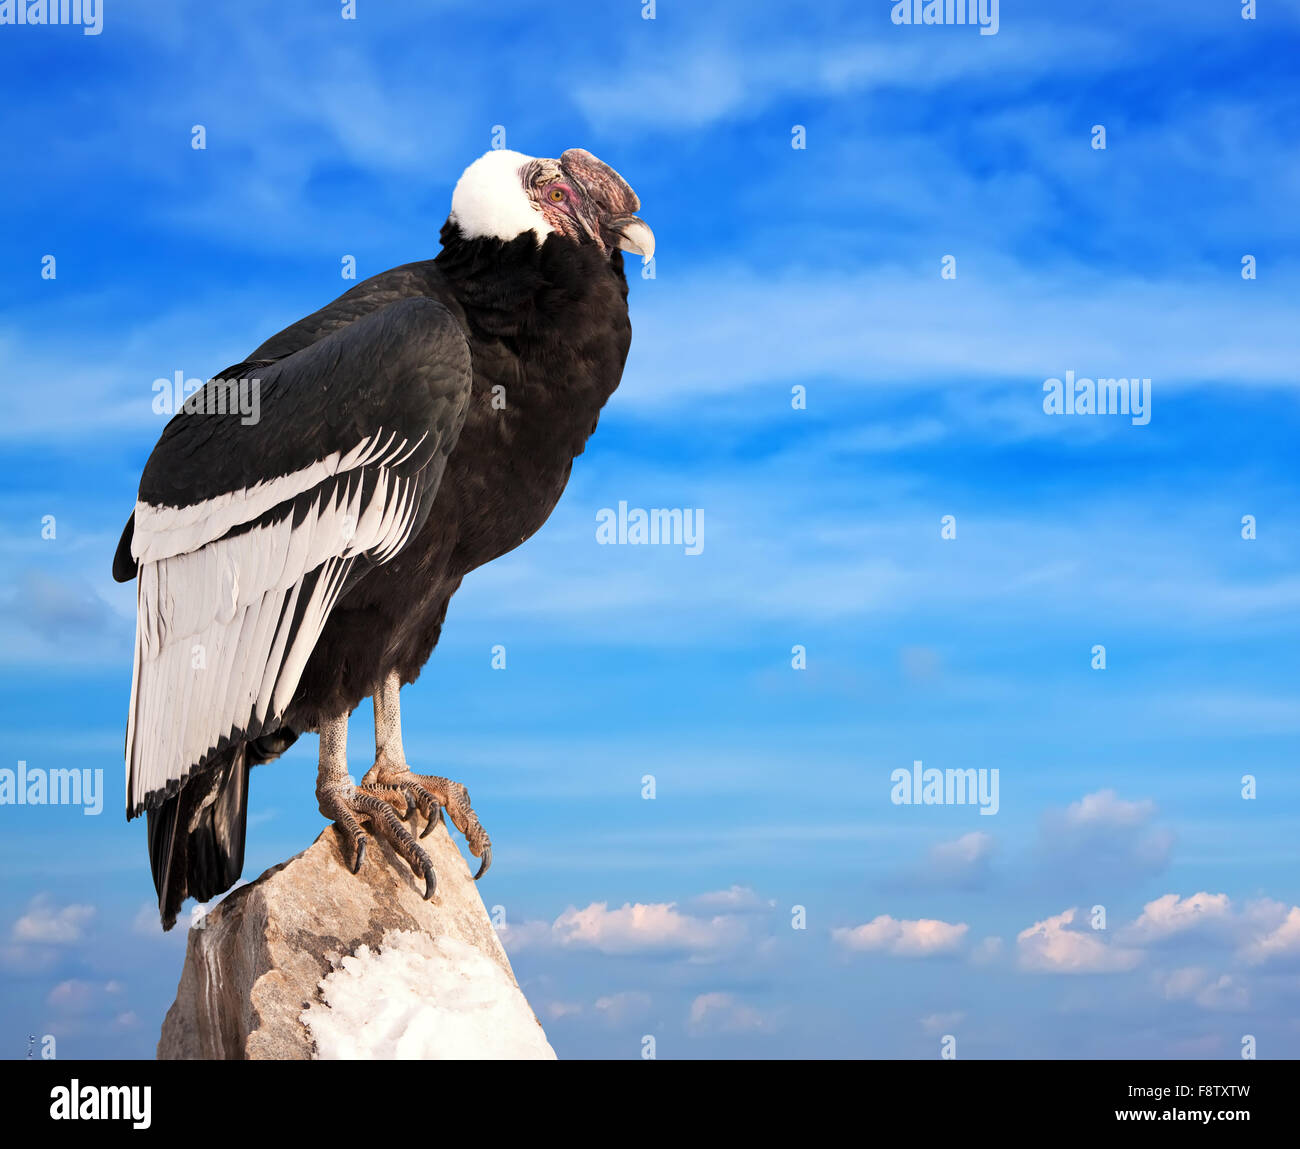 Andean Condor Sitting On Rock Against Sky Background Stock Photo Alamy